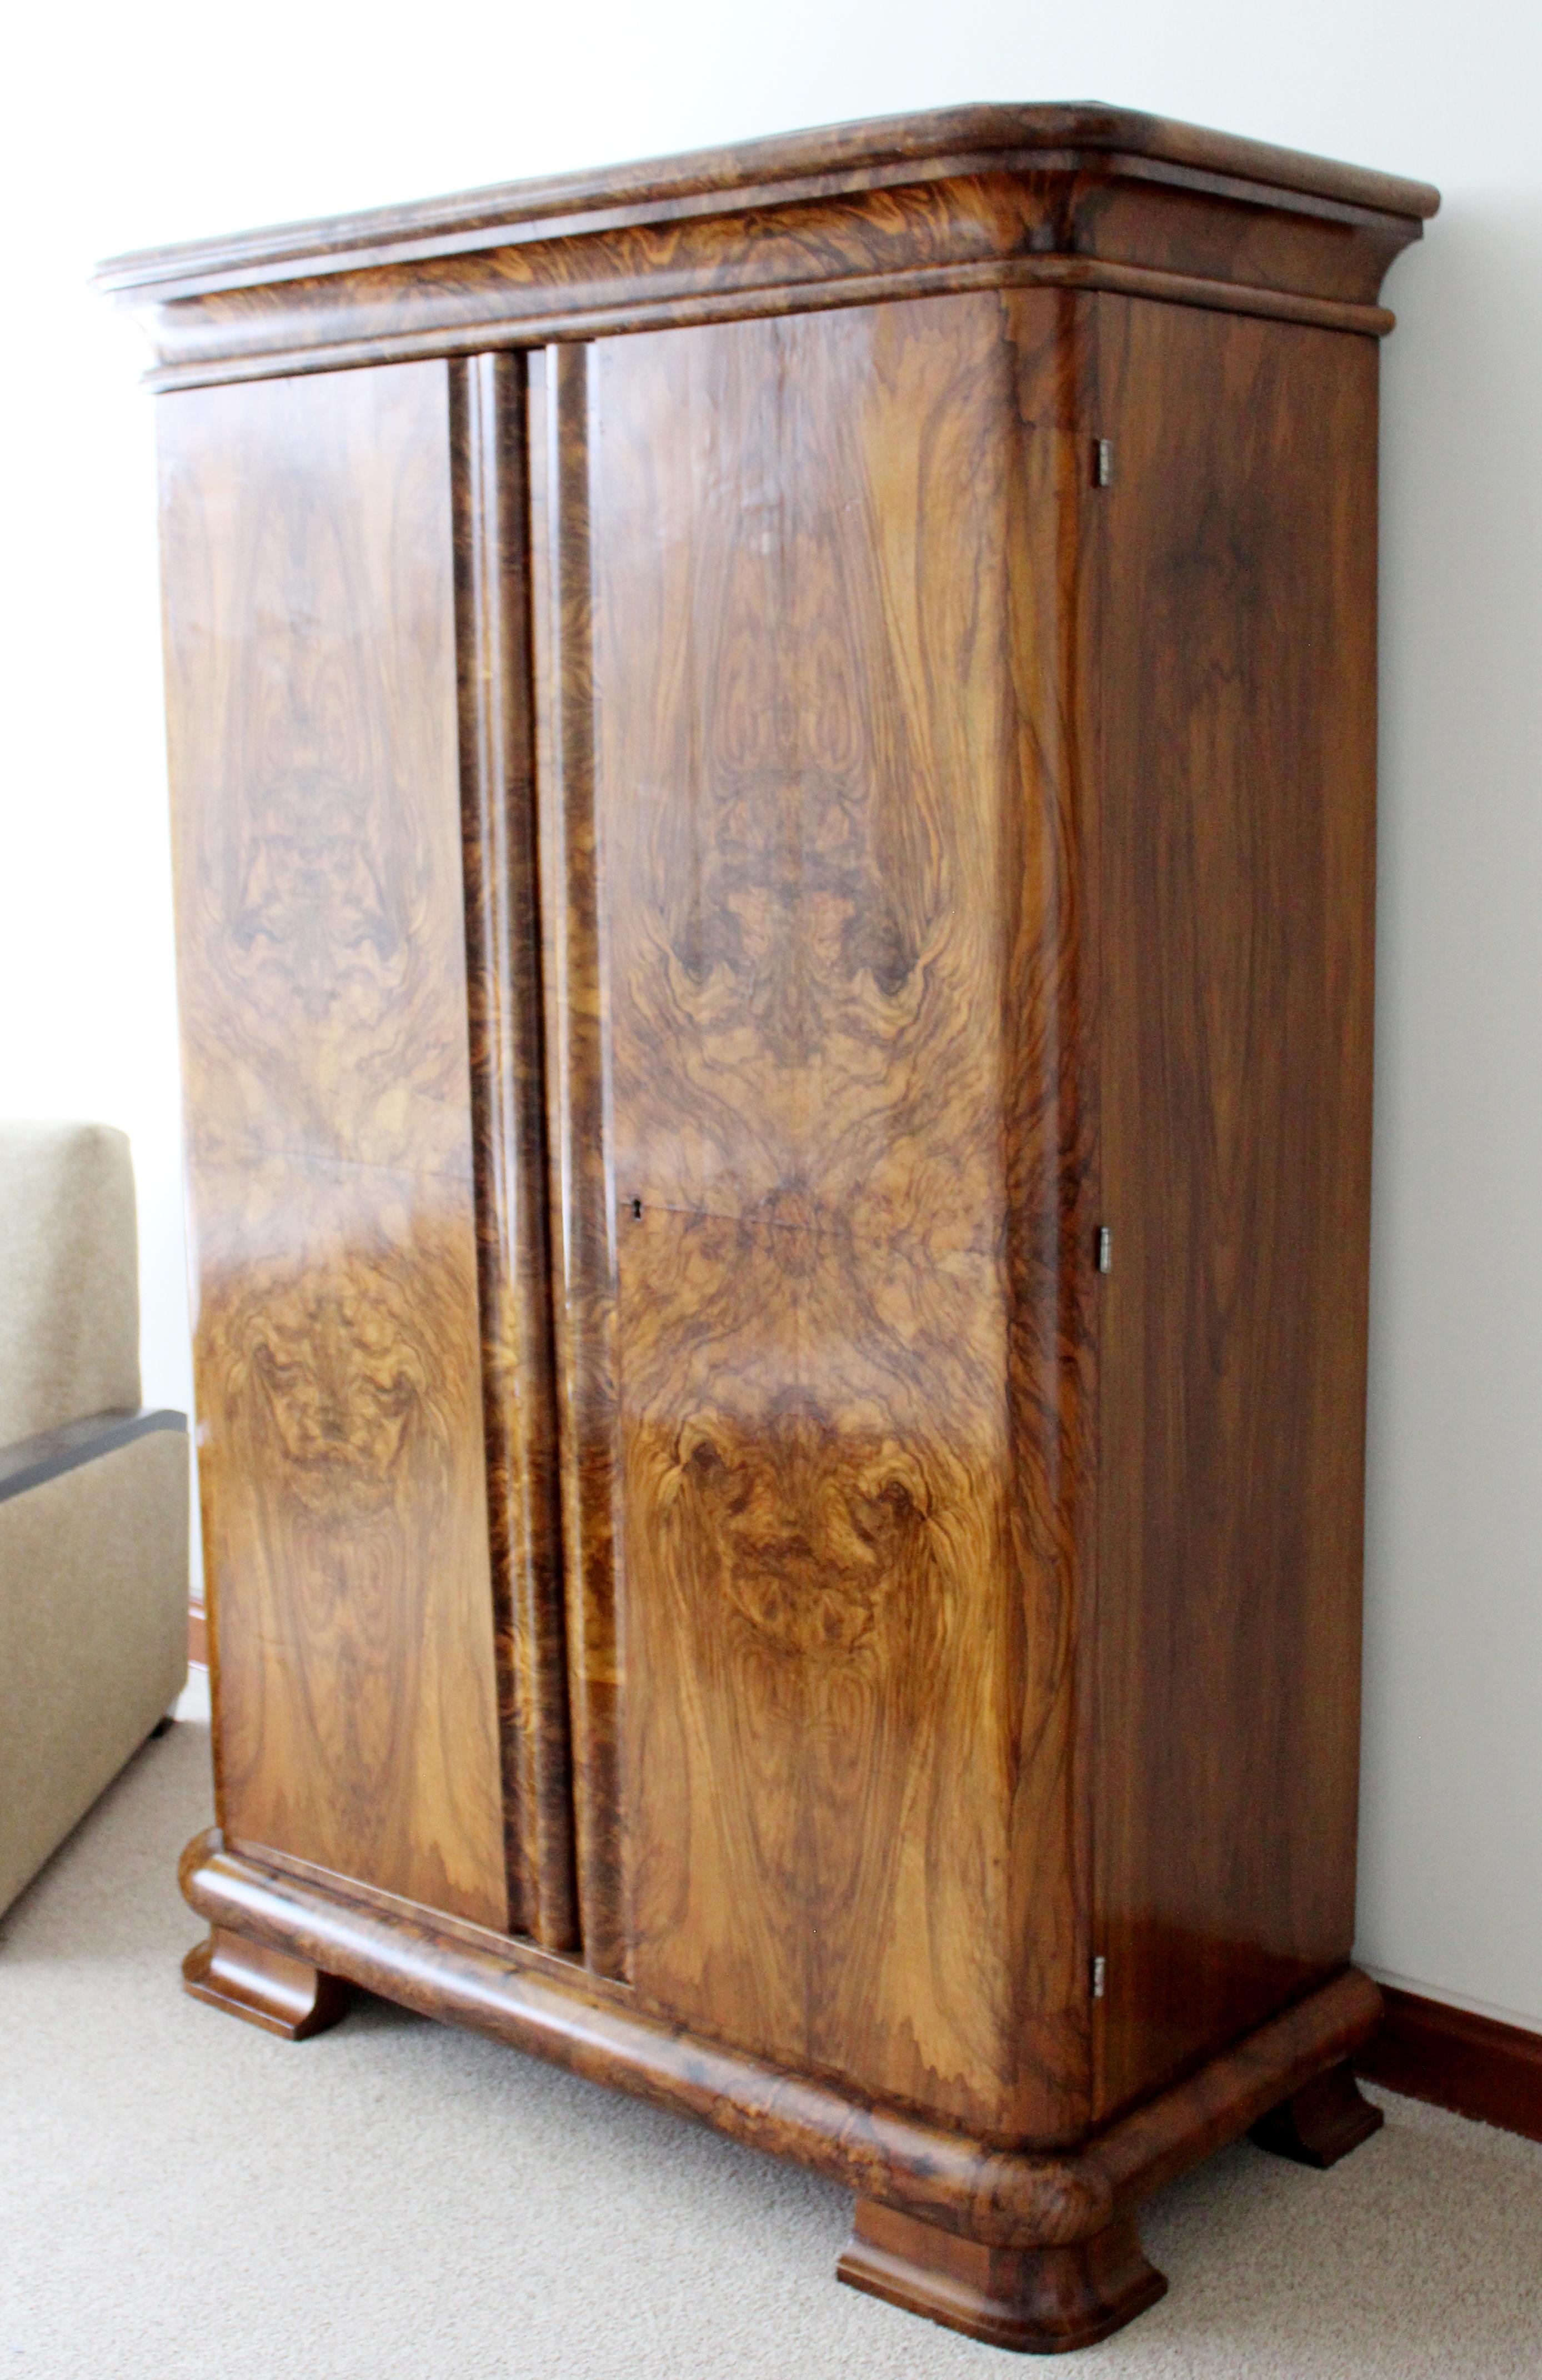 For your consideration is a stunning, antique, burl wood book matched panel cabinet armoire wardrobe unit, circa the 1940s. In very good vintage condition. The dimensions are 50.5